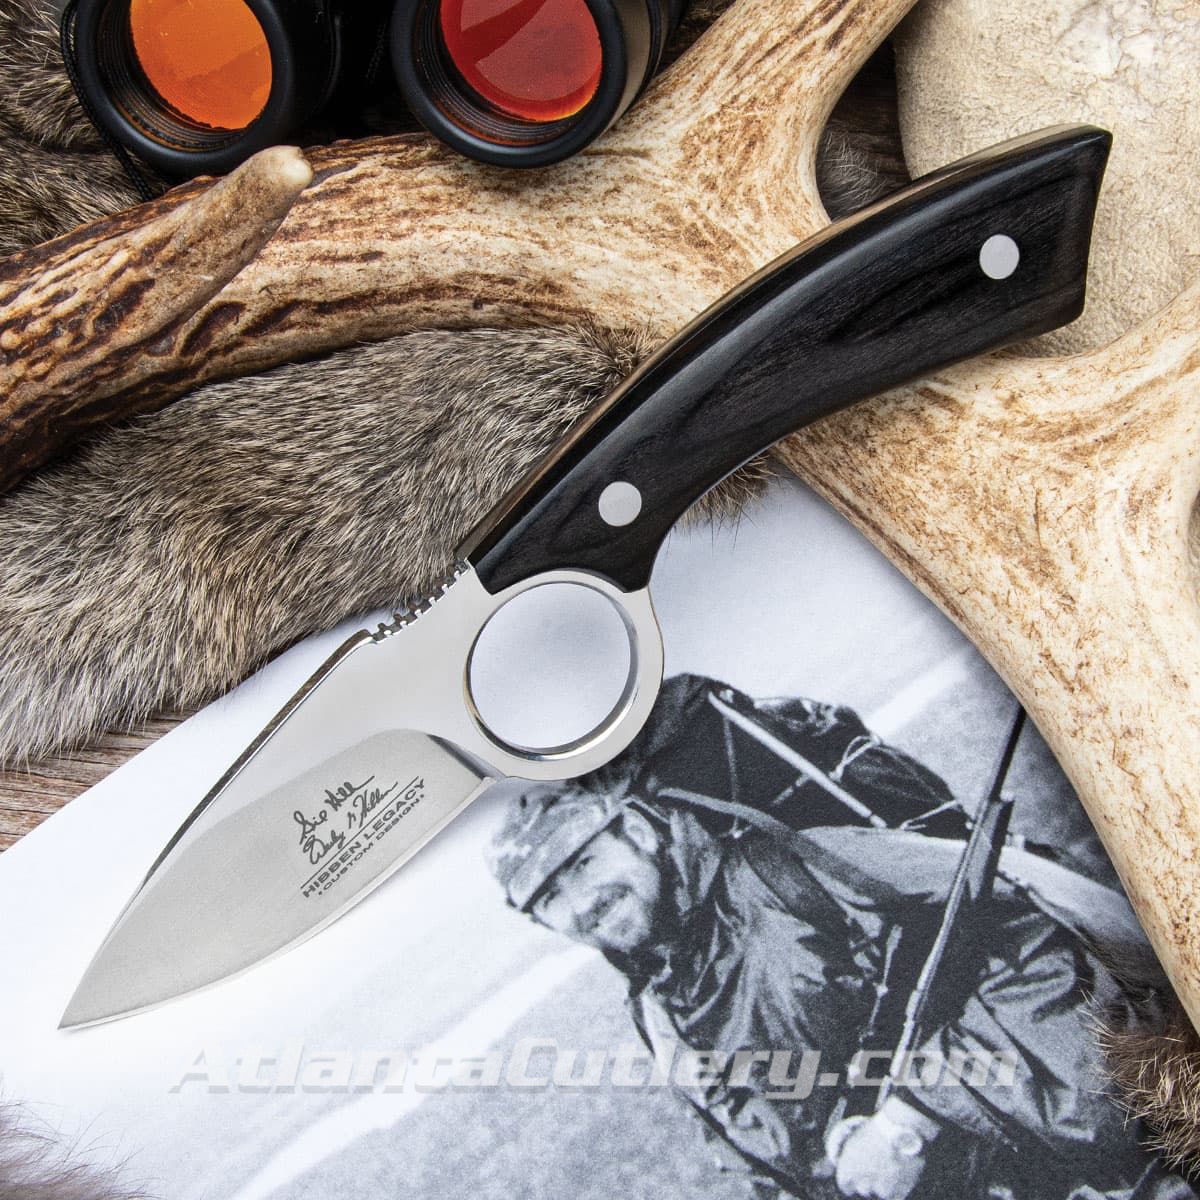 Hibben Legacy Skinning Knife has 5Cr15 stainless steel blade with a finger ring, pakkawood scales and includes leather sheath